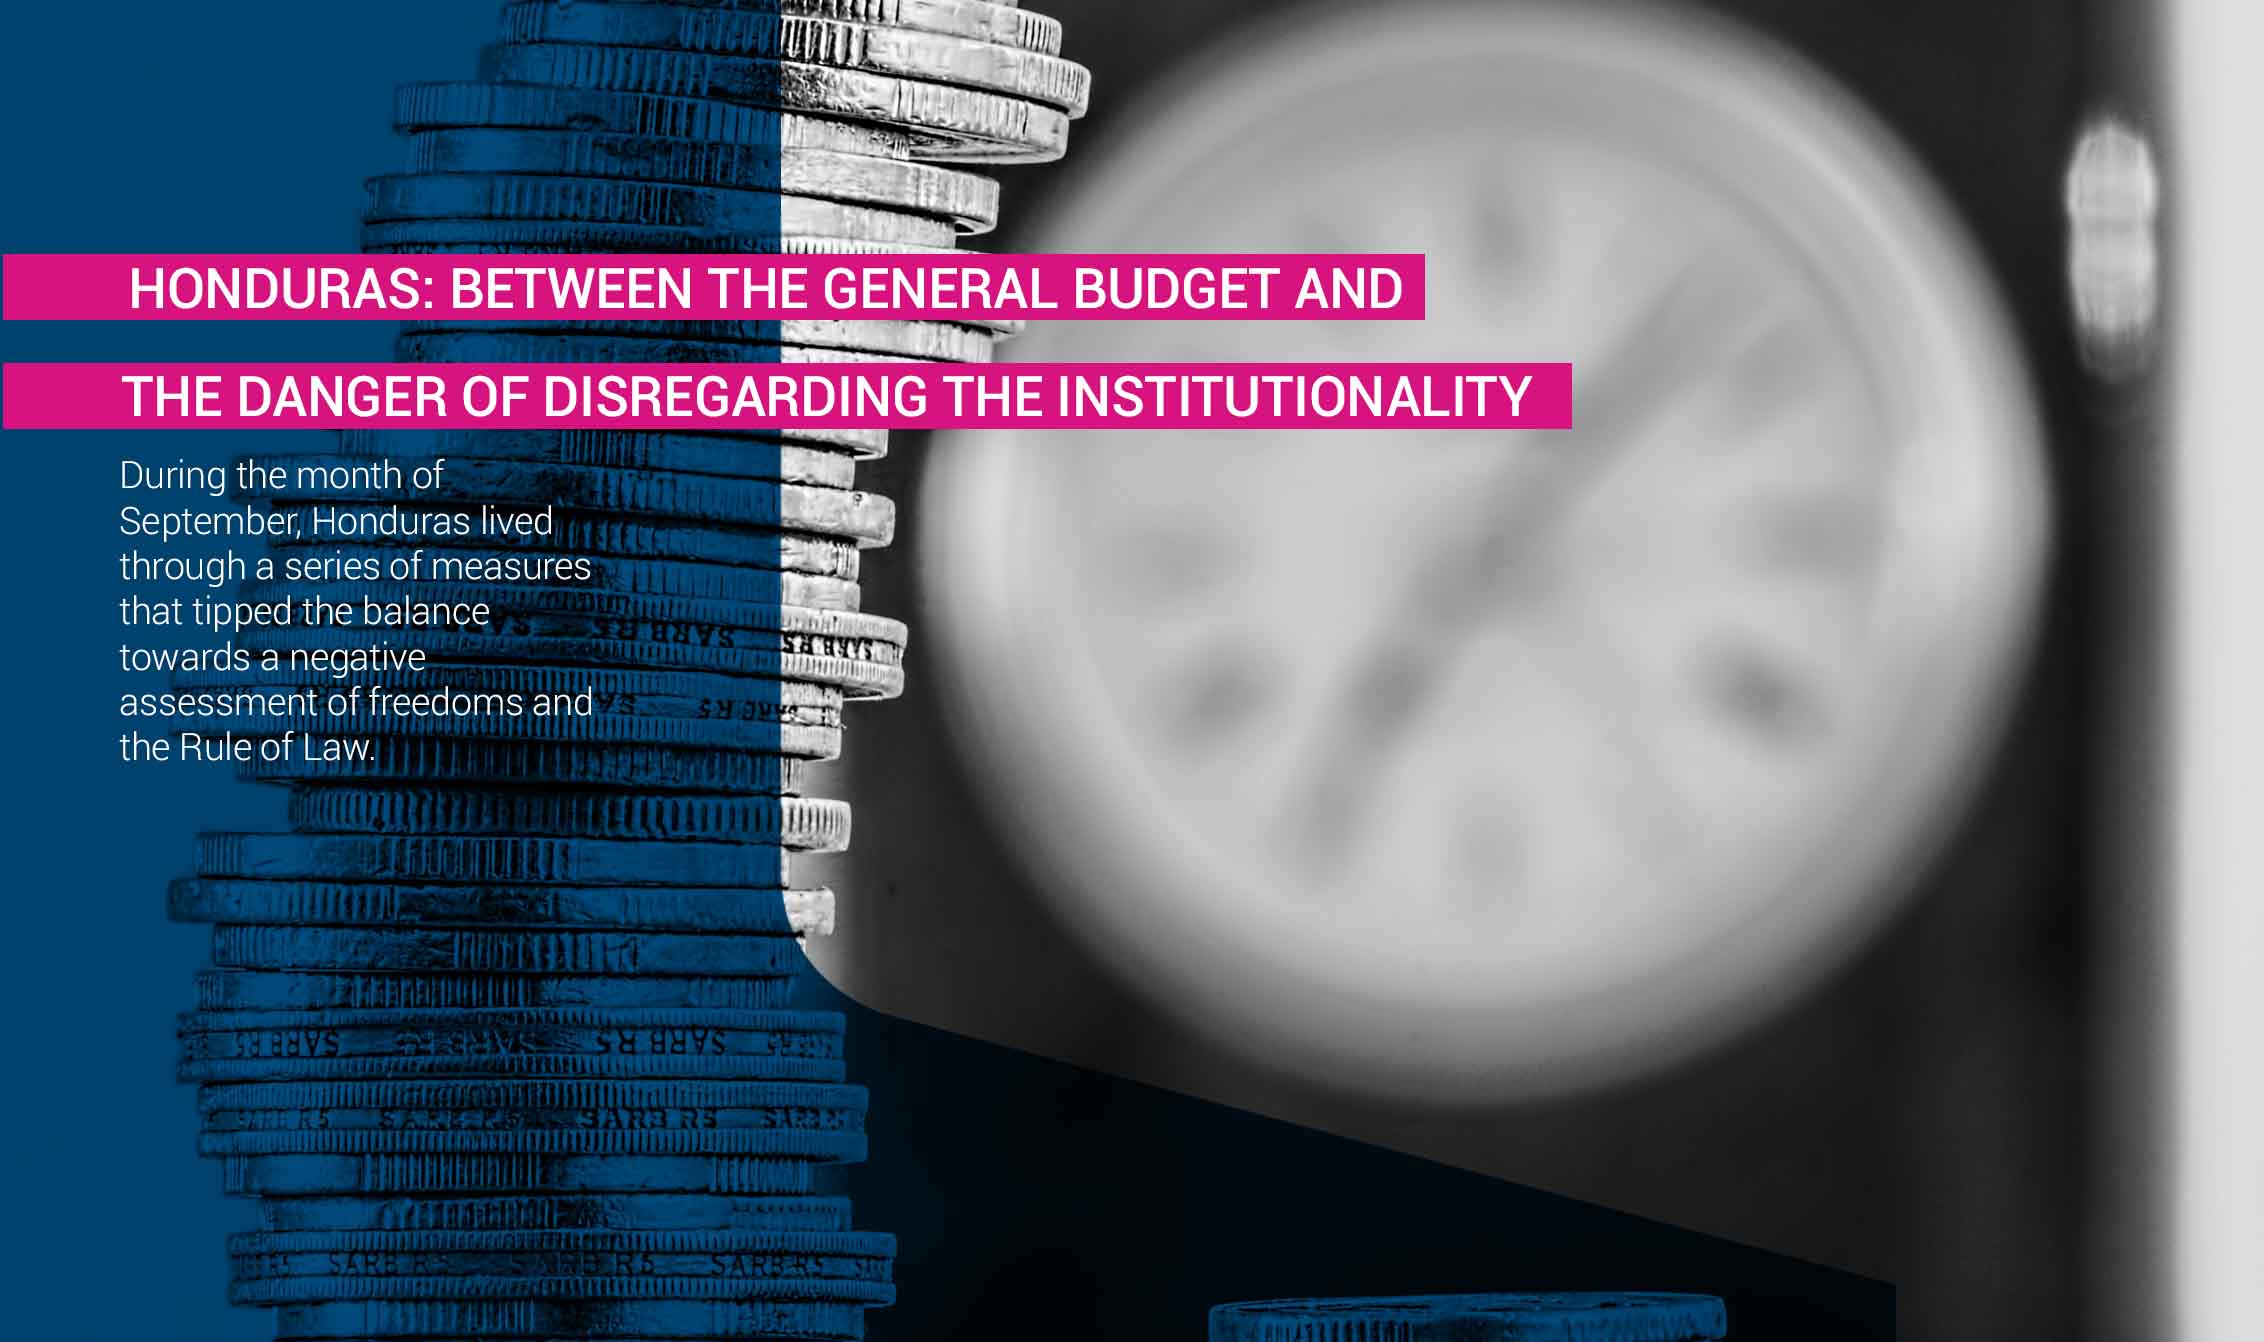 Honduras: between the General Budget and the Danger of Disregarding the Institutionality